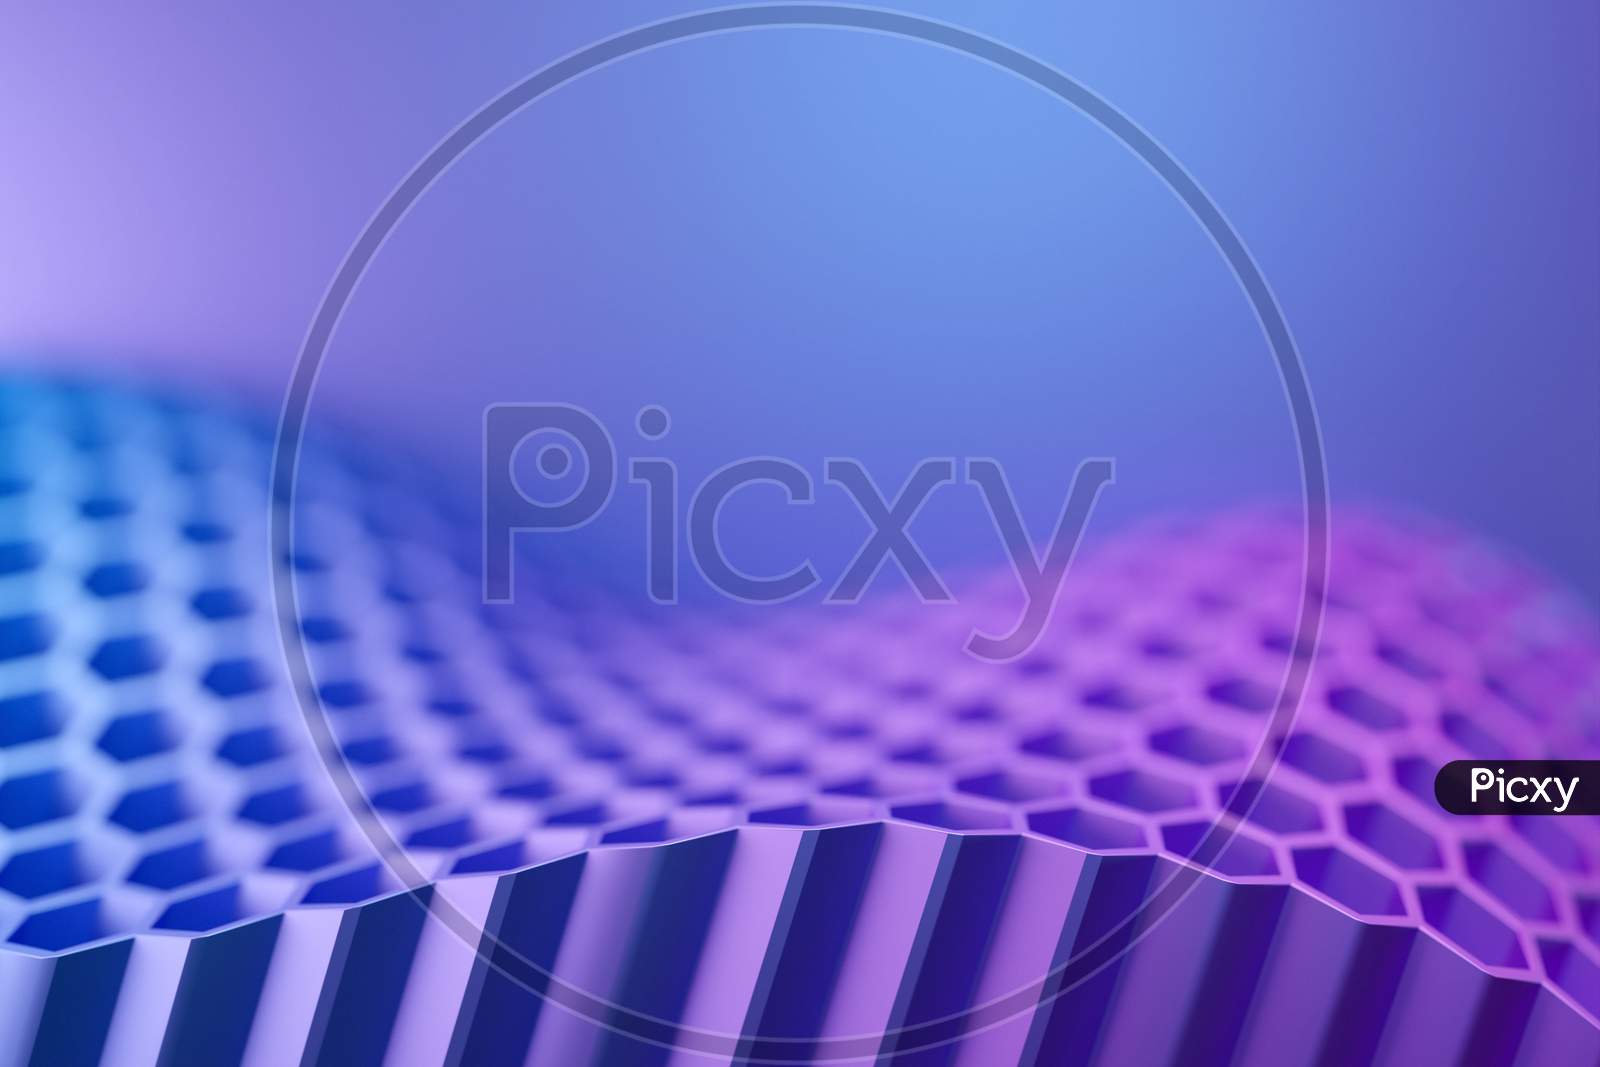 3D Illustration Of Geometric  Pink And Blue Hexagon  Wave Surface.  3D Illustration Of A Honeycomb Monochrome Honeycomb For Honey. Pattern Of Simple Geometric Hexagonal Shapes